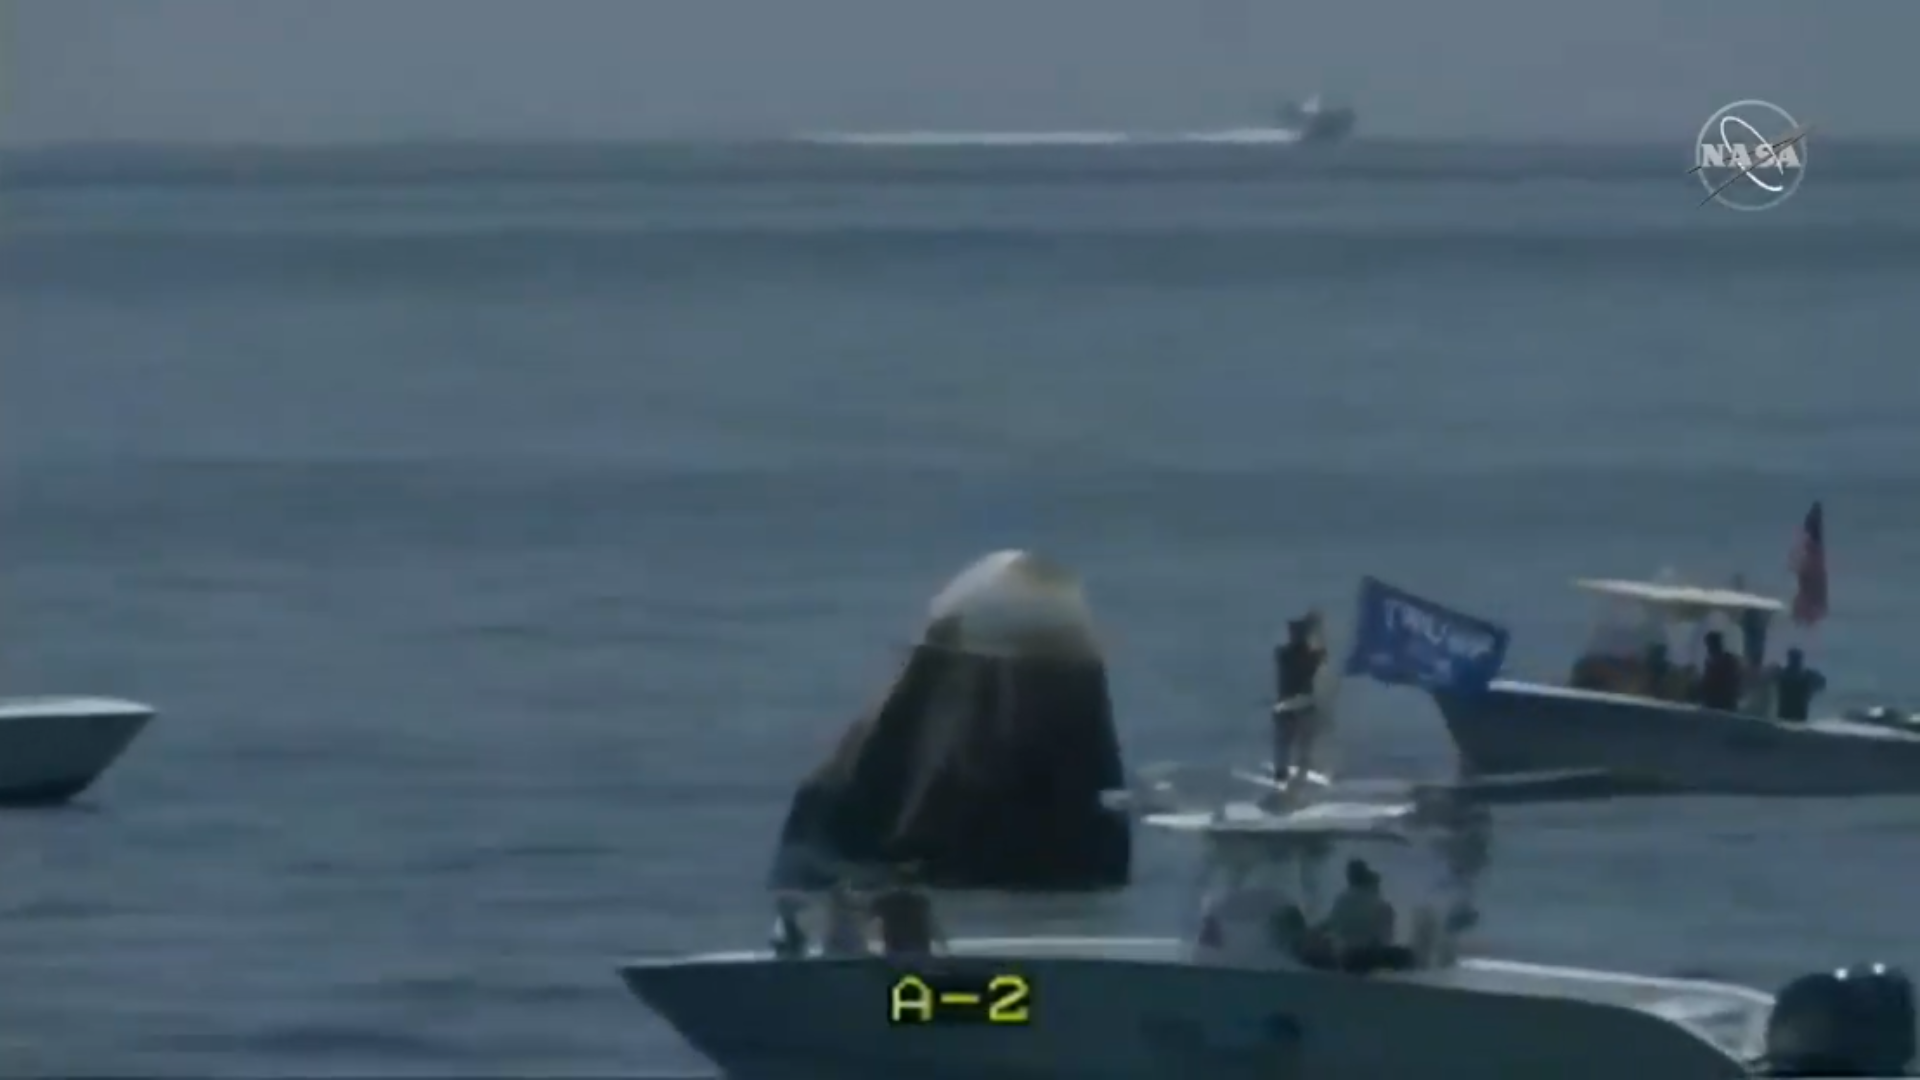 SpaceX's recovery team radioed out to the boaters in an attempt to get them away from the Crew Dragon capsule.